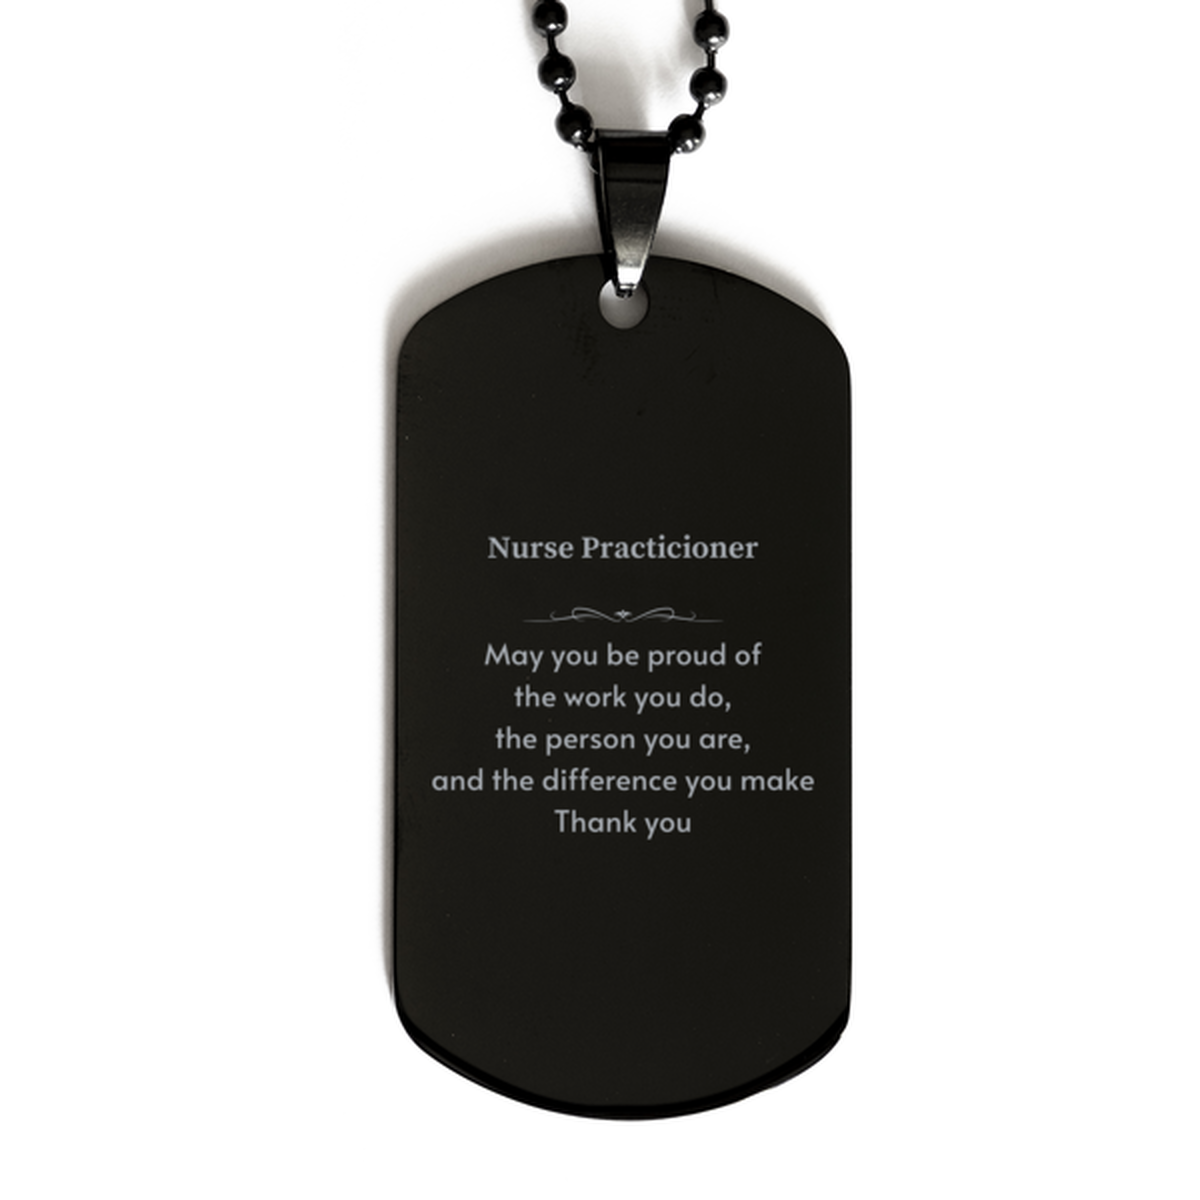 Heartwarming Black Dog Tag Retirement Coworkers Gifts for Nurse Practicioner, Nurse Practicioner May You be proud of the work you do, the person you are Gifts for Boss Men Women Friends